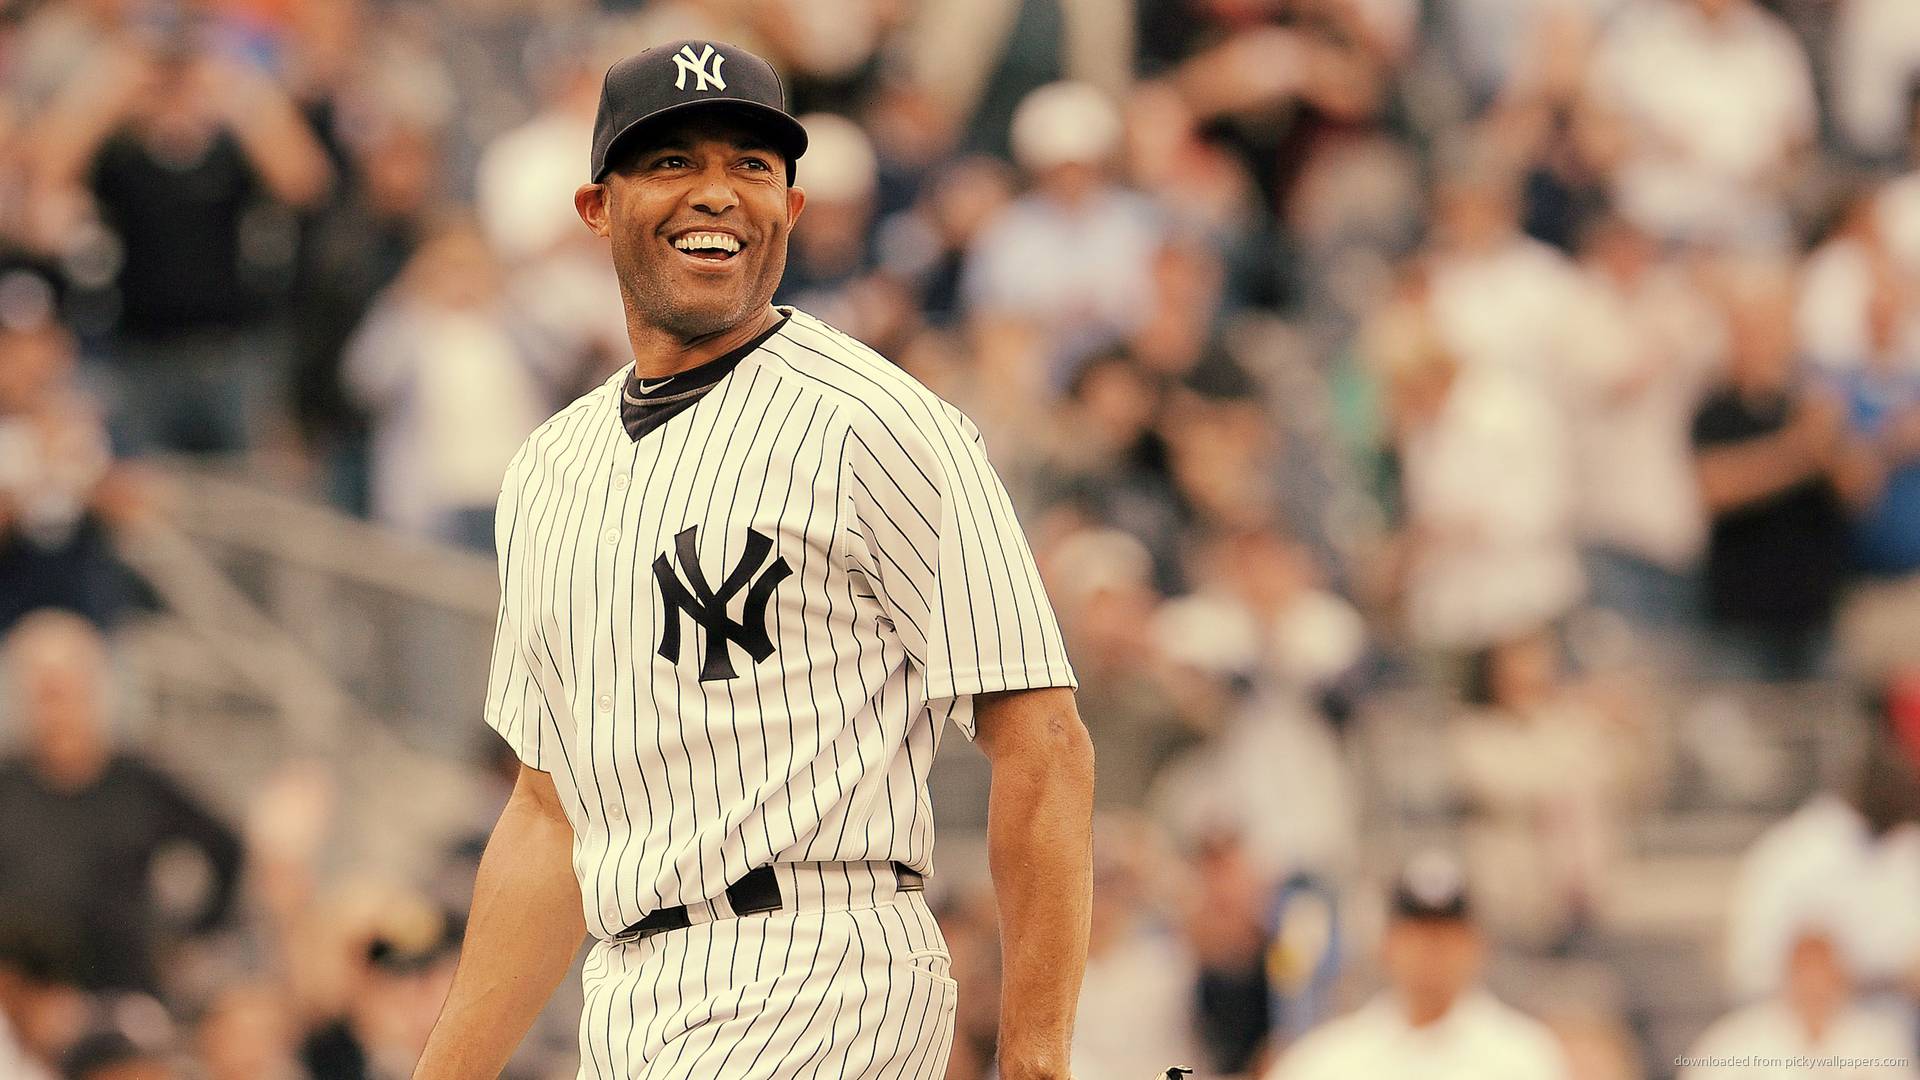 Download 1920x1080 Mariano Rivera Laughs Wallpapers.